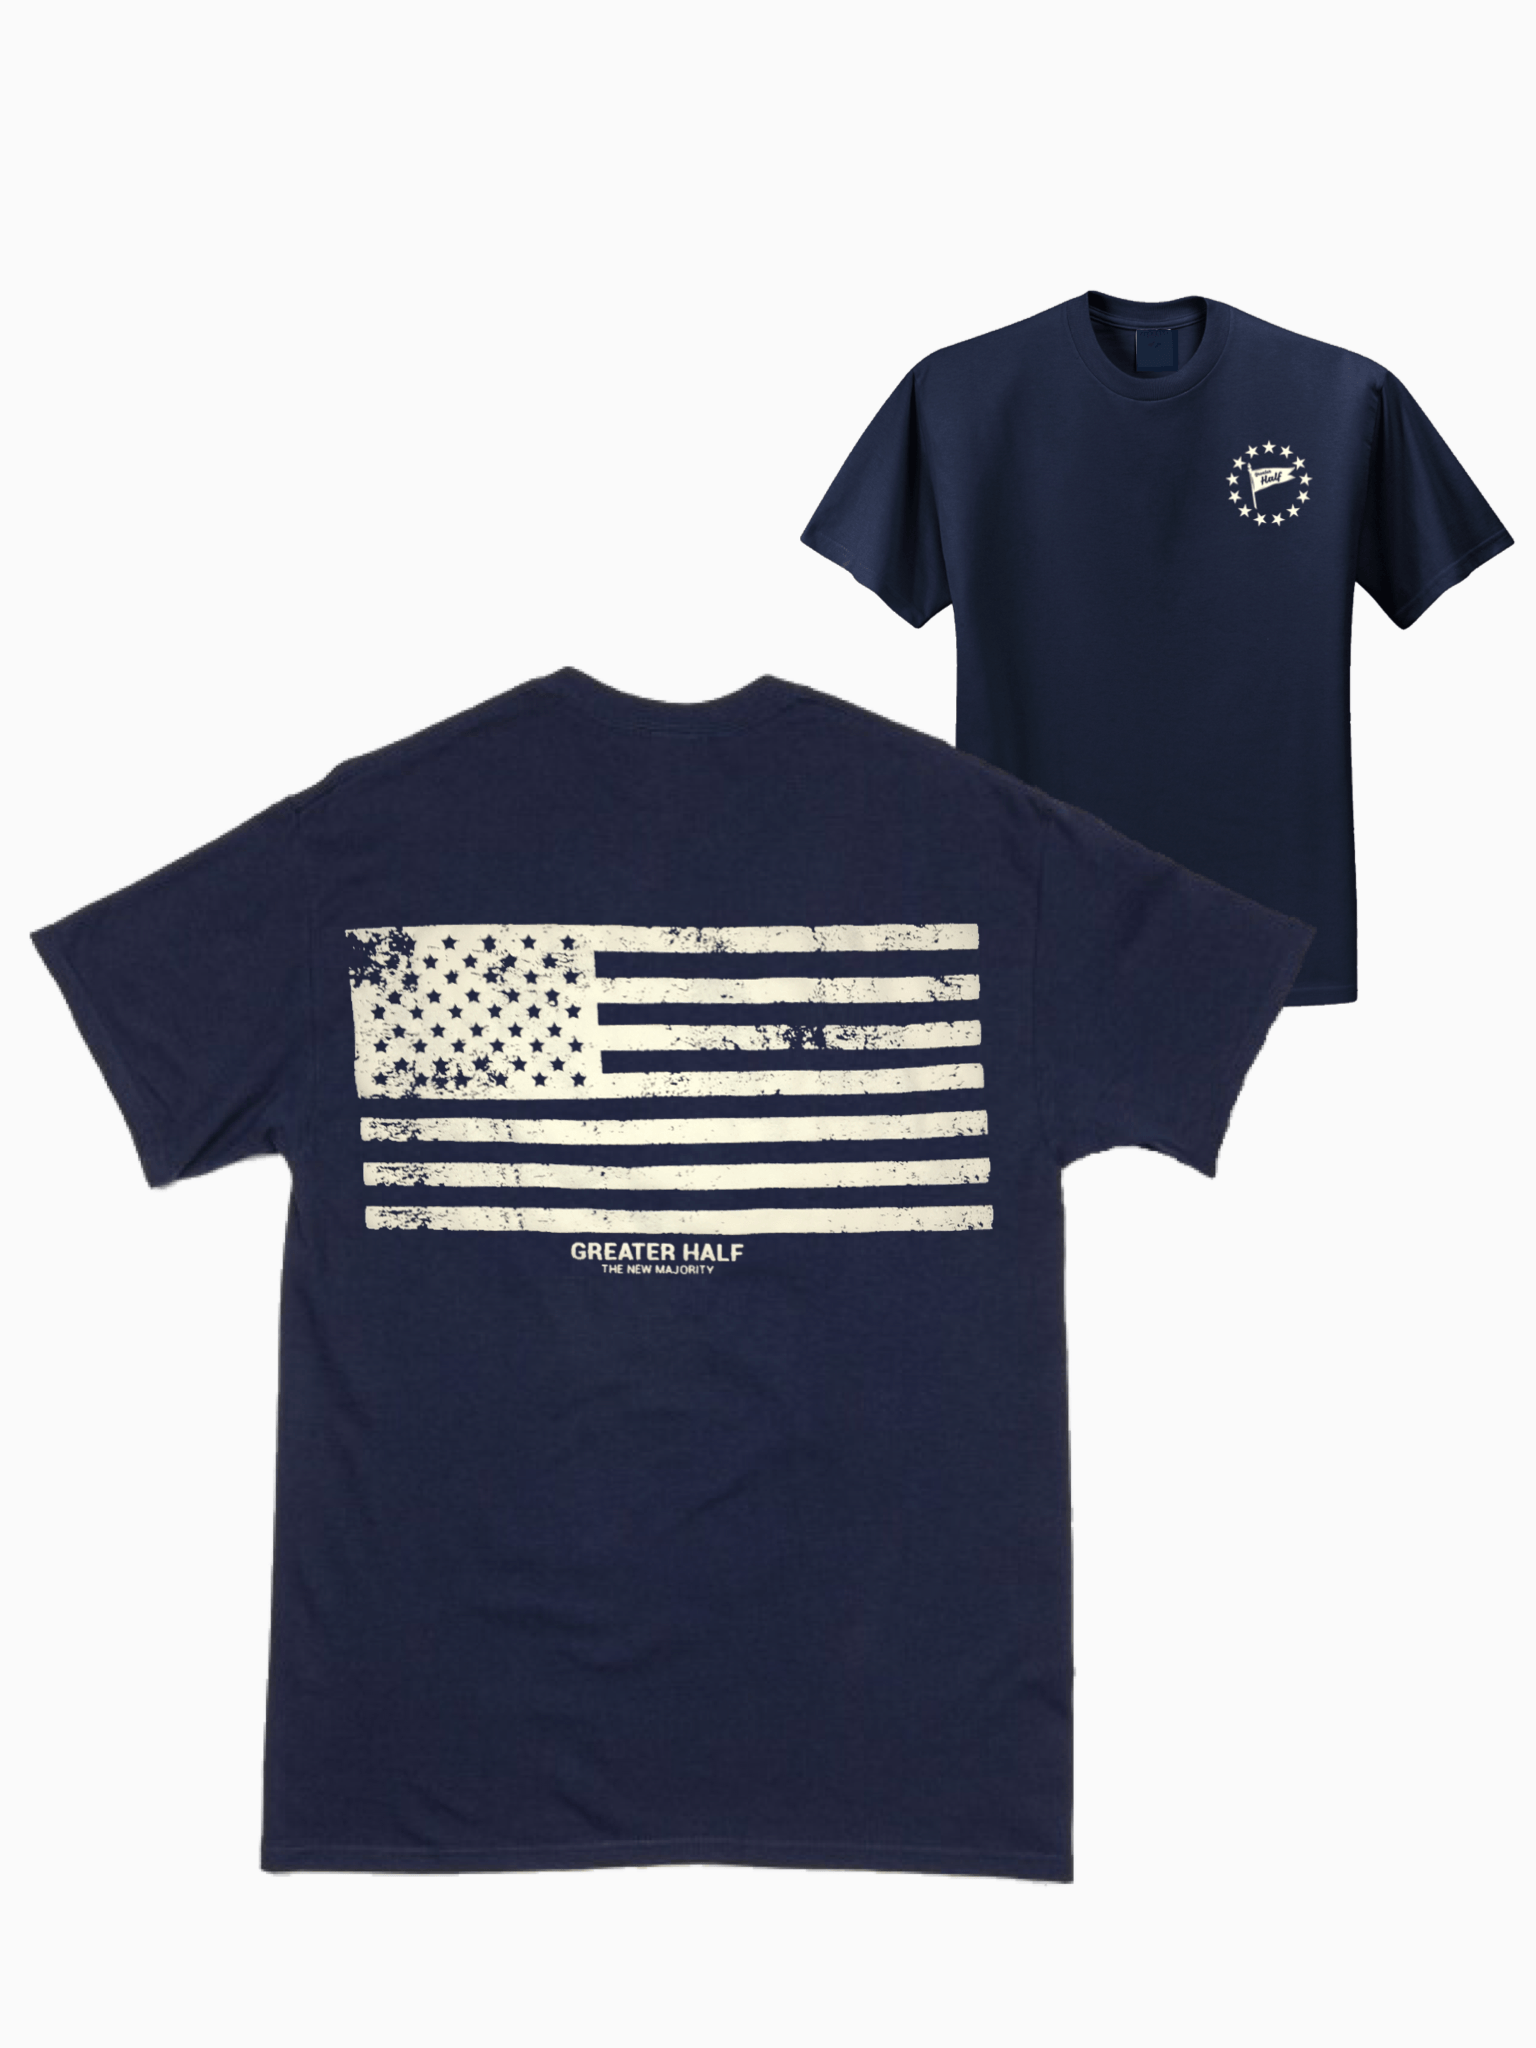 The Rugged Patriot T-Shirt – Greater Half